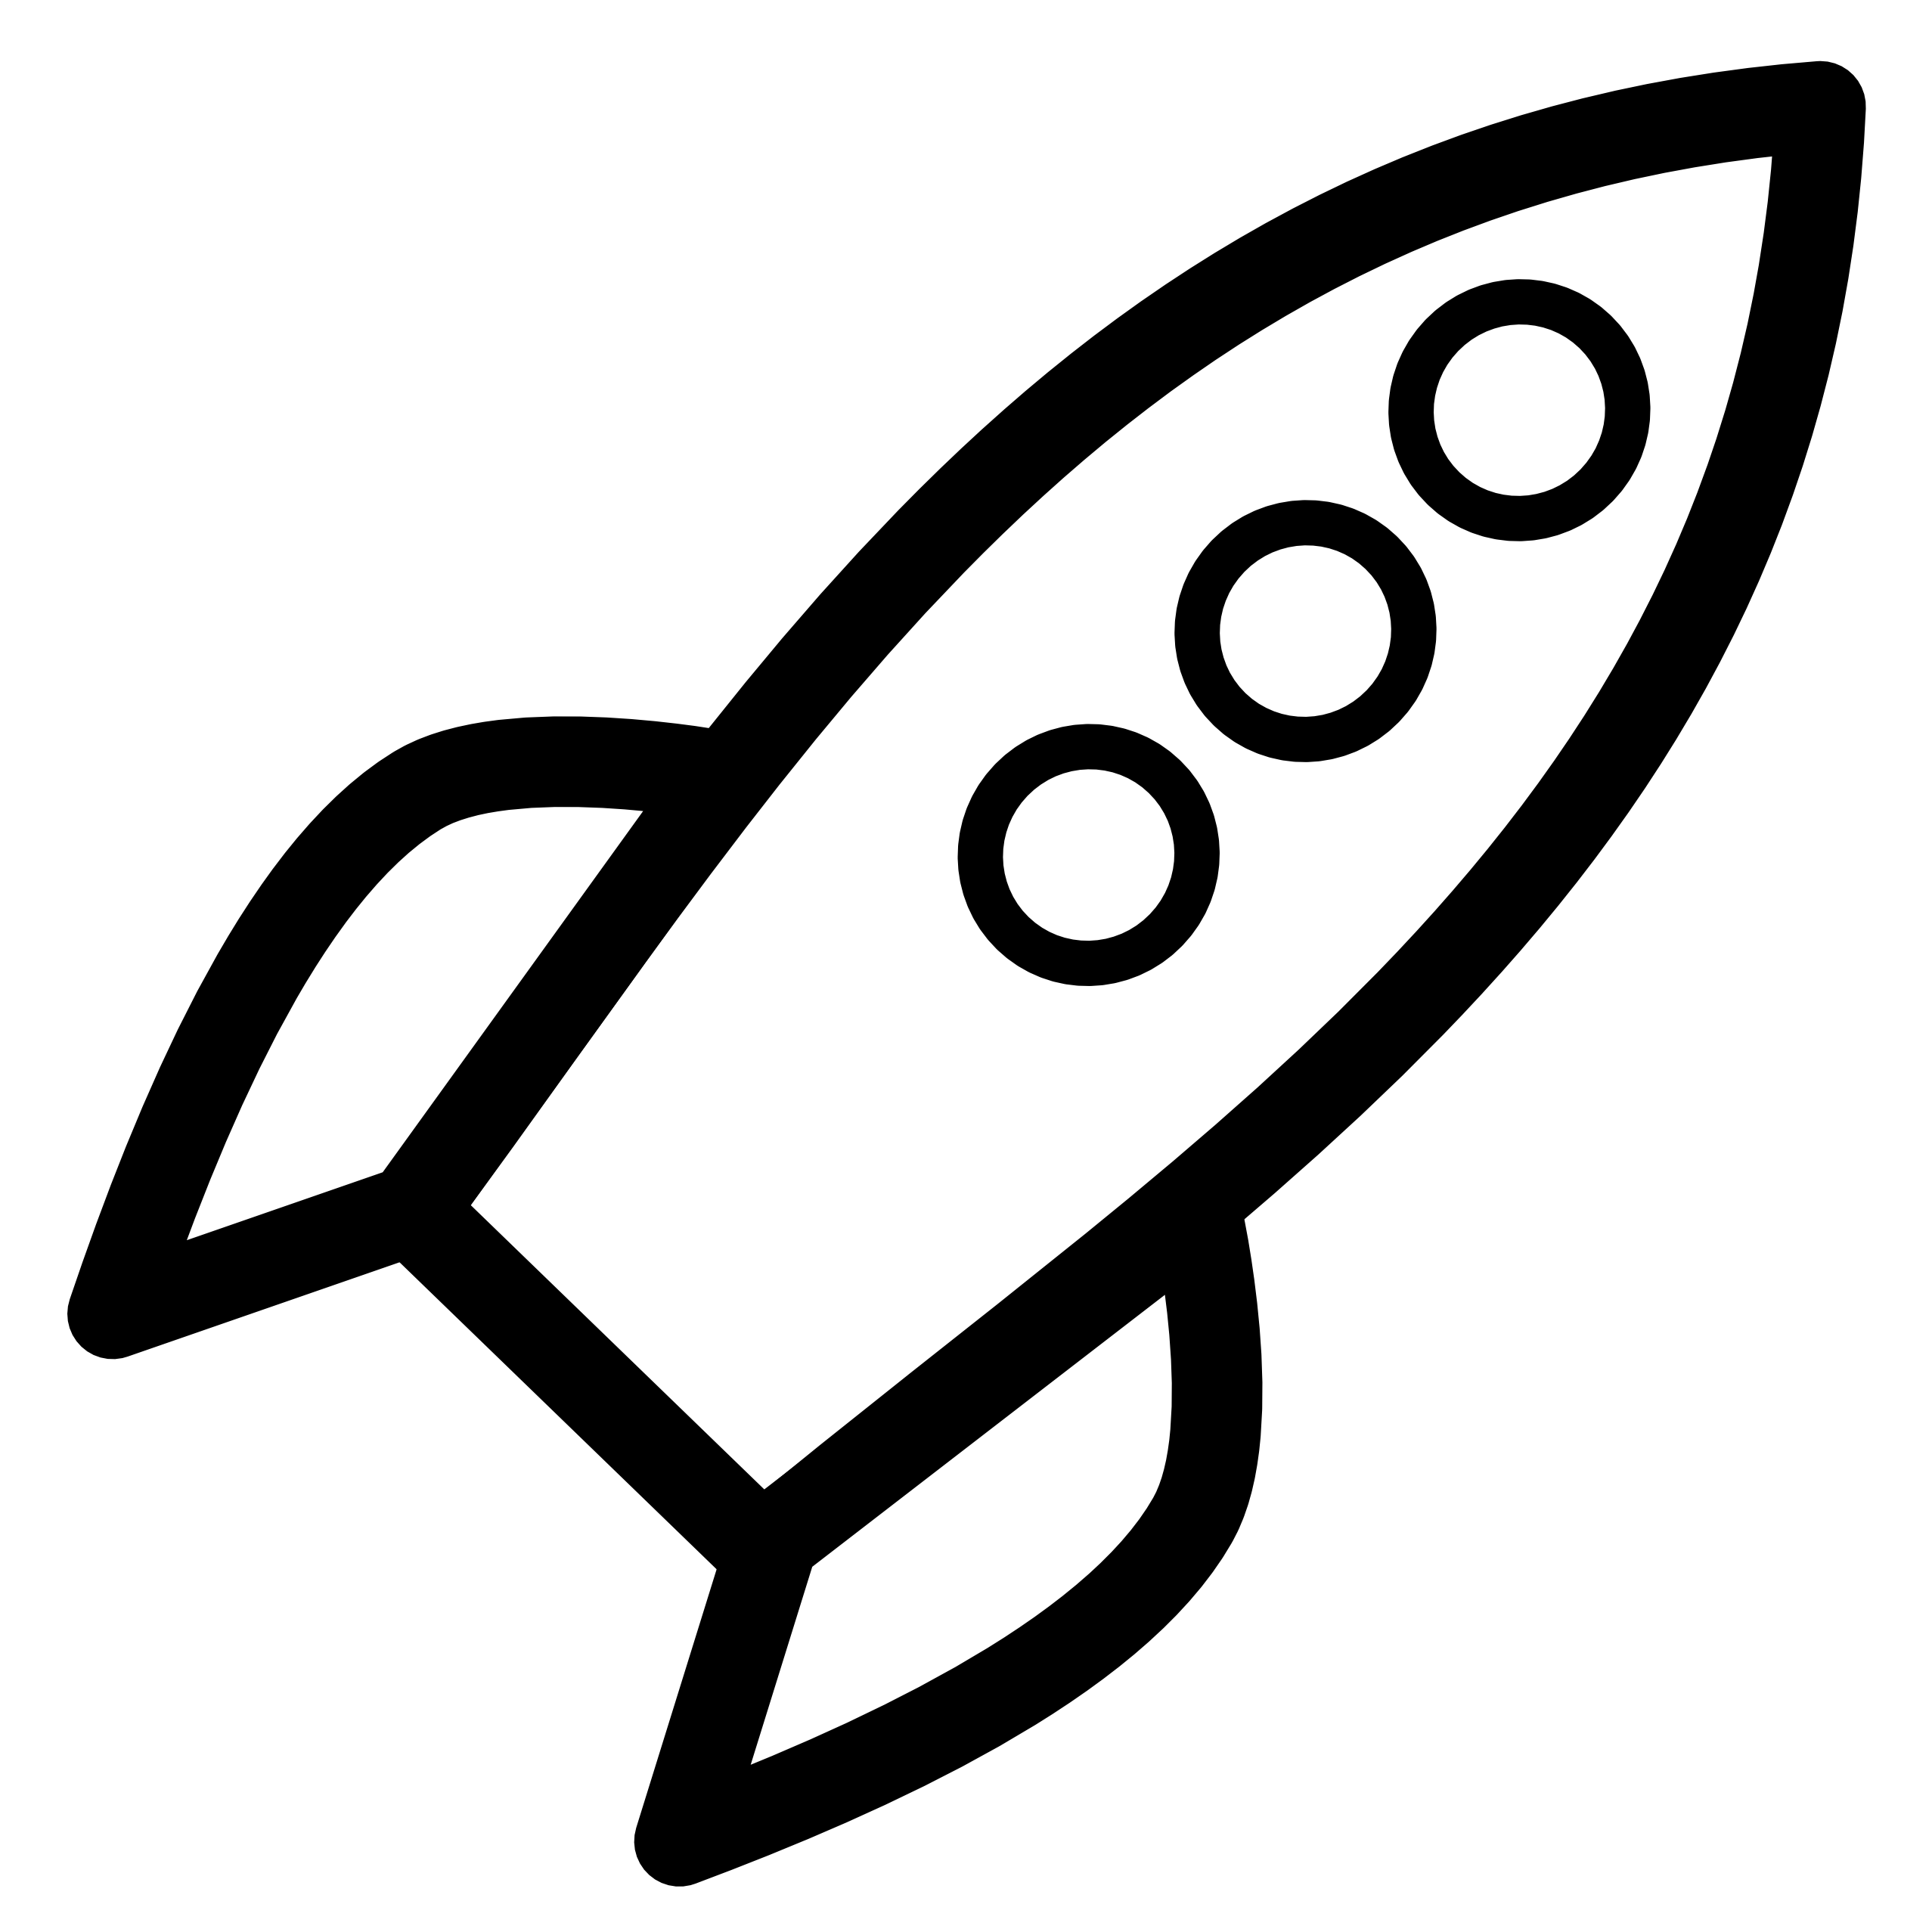 Spaceship clipart missile launch. Rocket icon black white